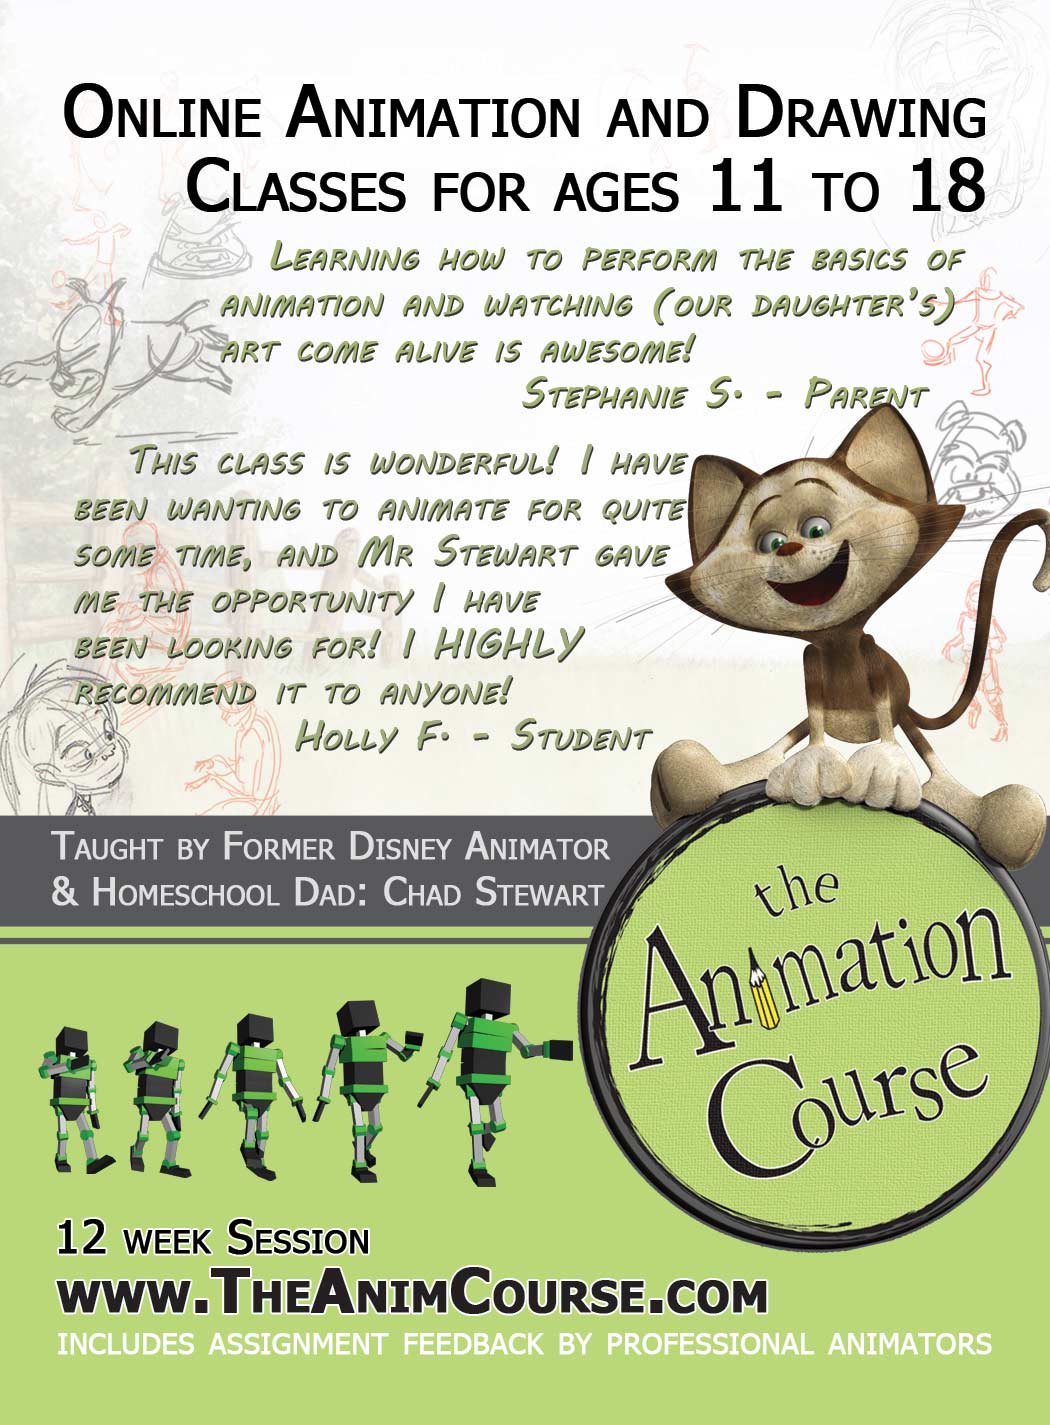 The Animation Course Advertisement